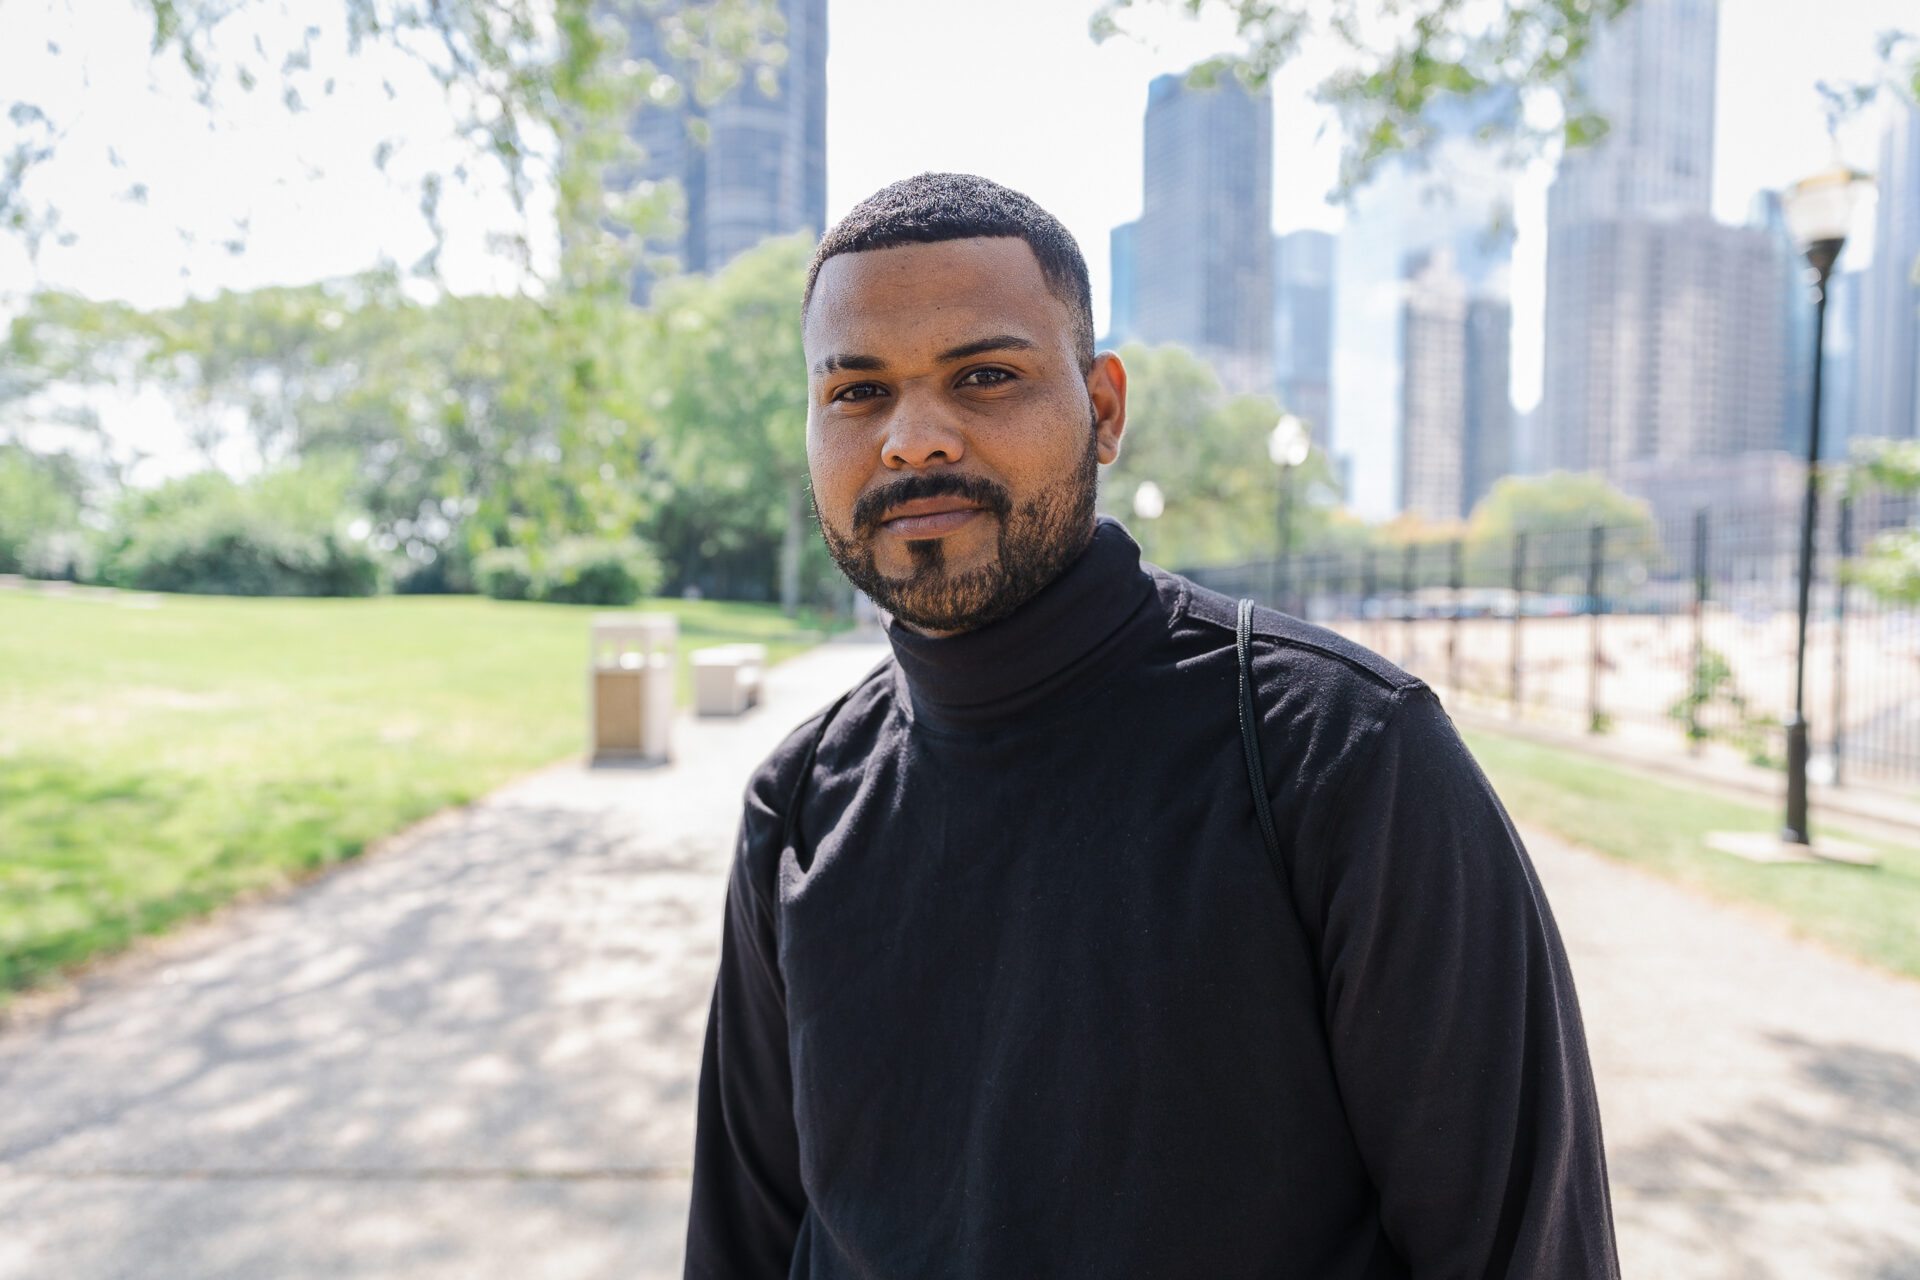 Omar with a black turtleneck and beard and mustache standing on a sidewalk, lots of skyscrapers in the background